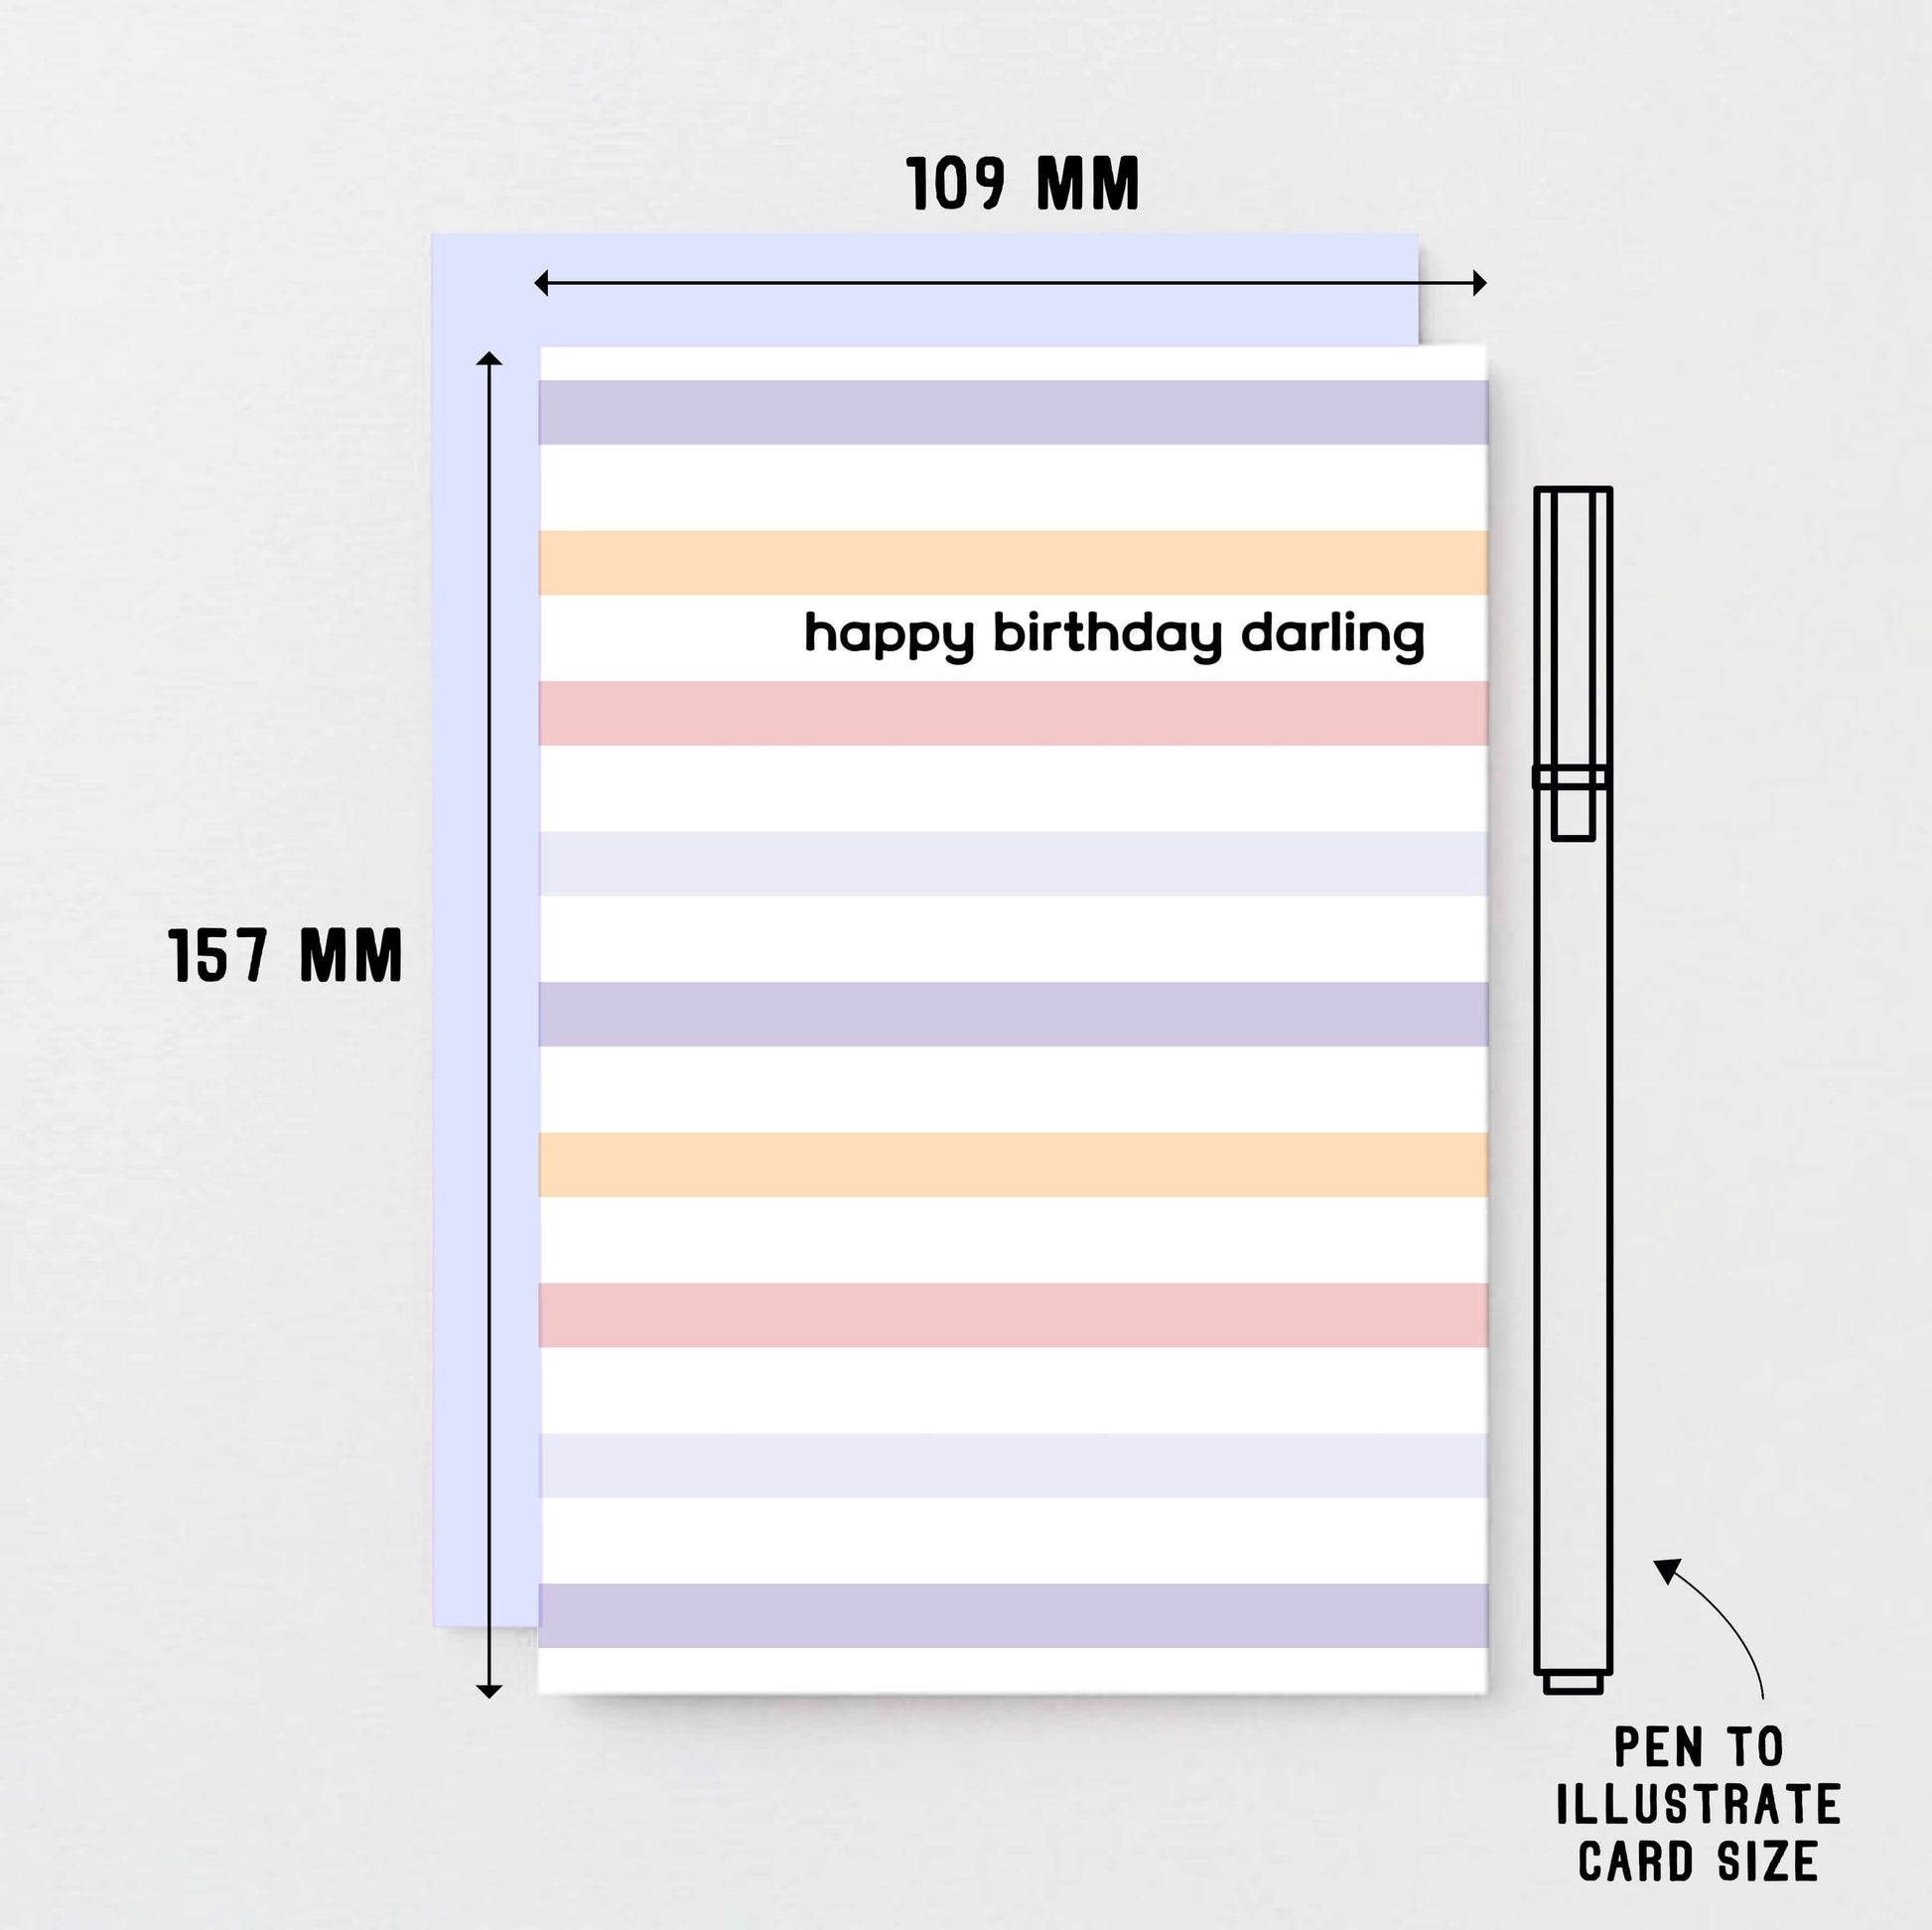 Happy Birthday Darling Card by SixElevenCreations. Product Code SE3501A6